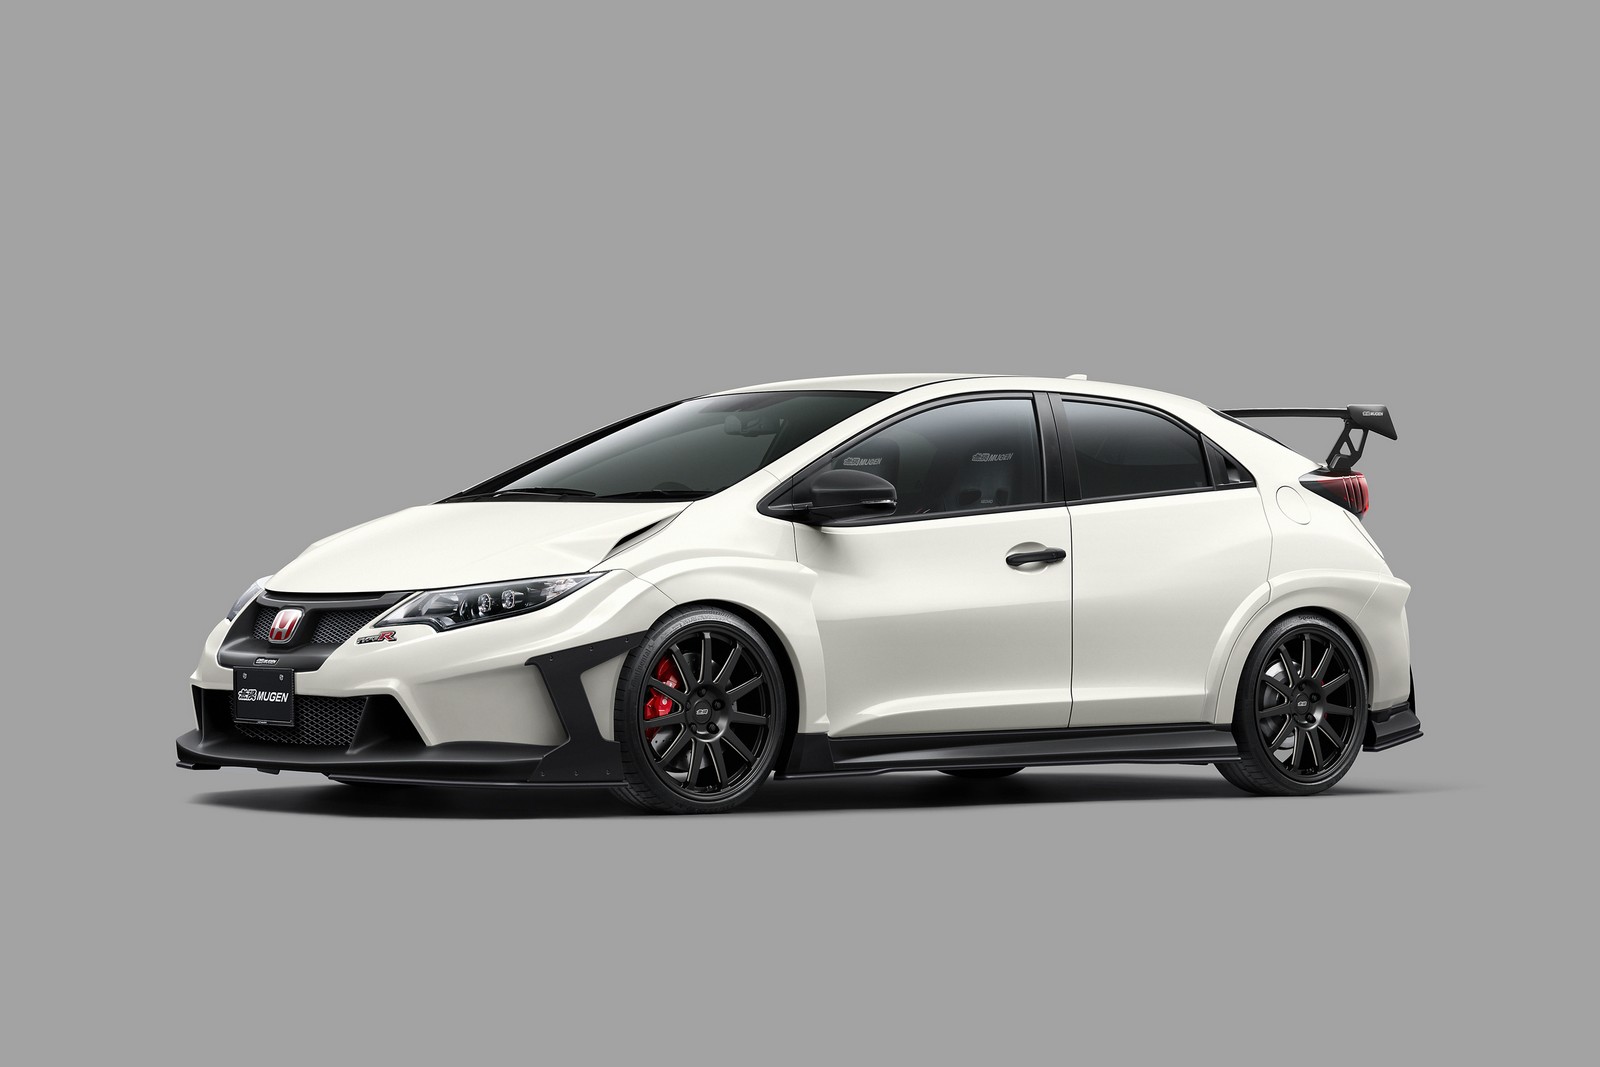 Honda And Mugen Reveal Five Concepts For Tokyo Auto Salon